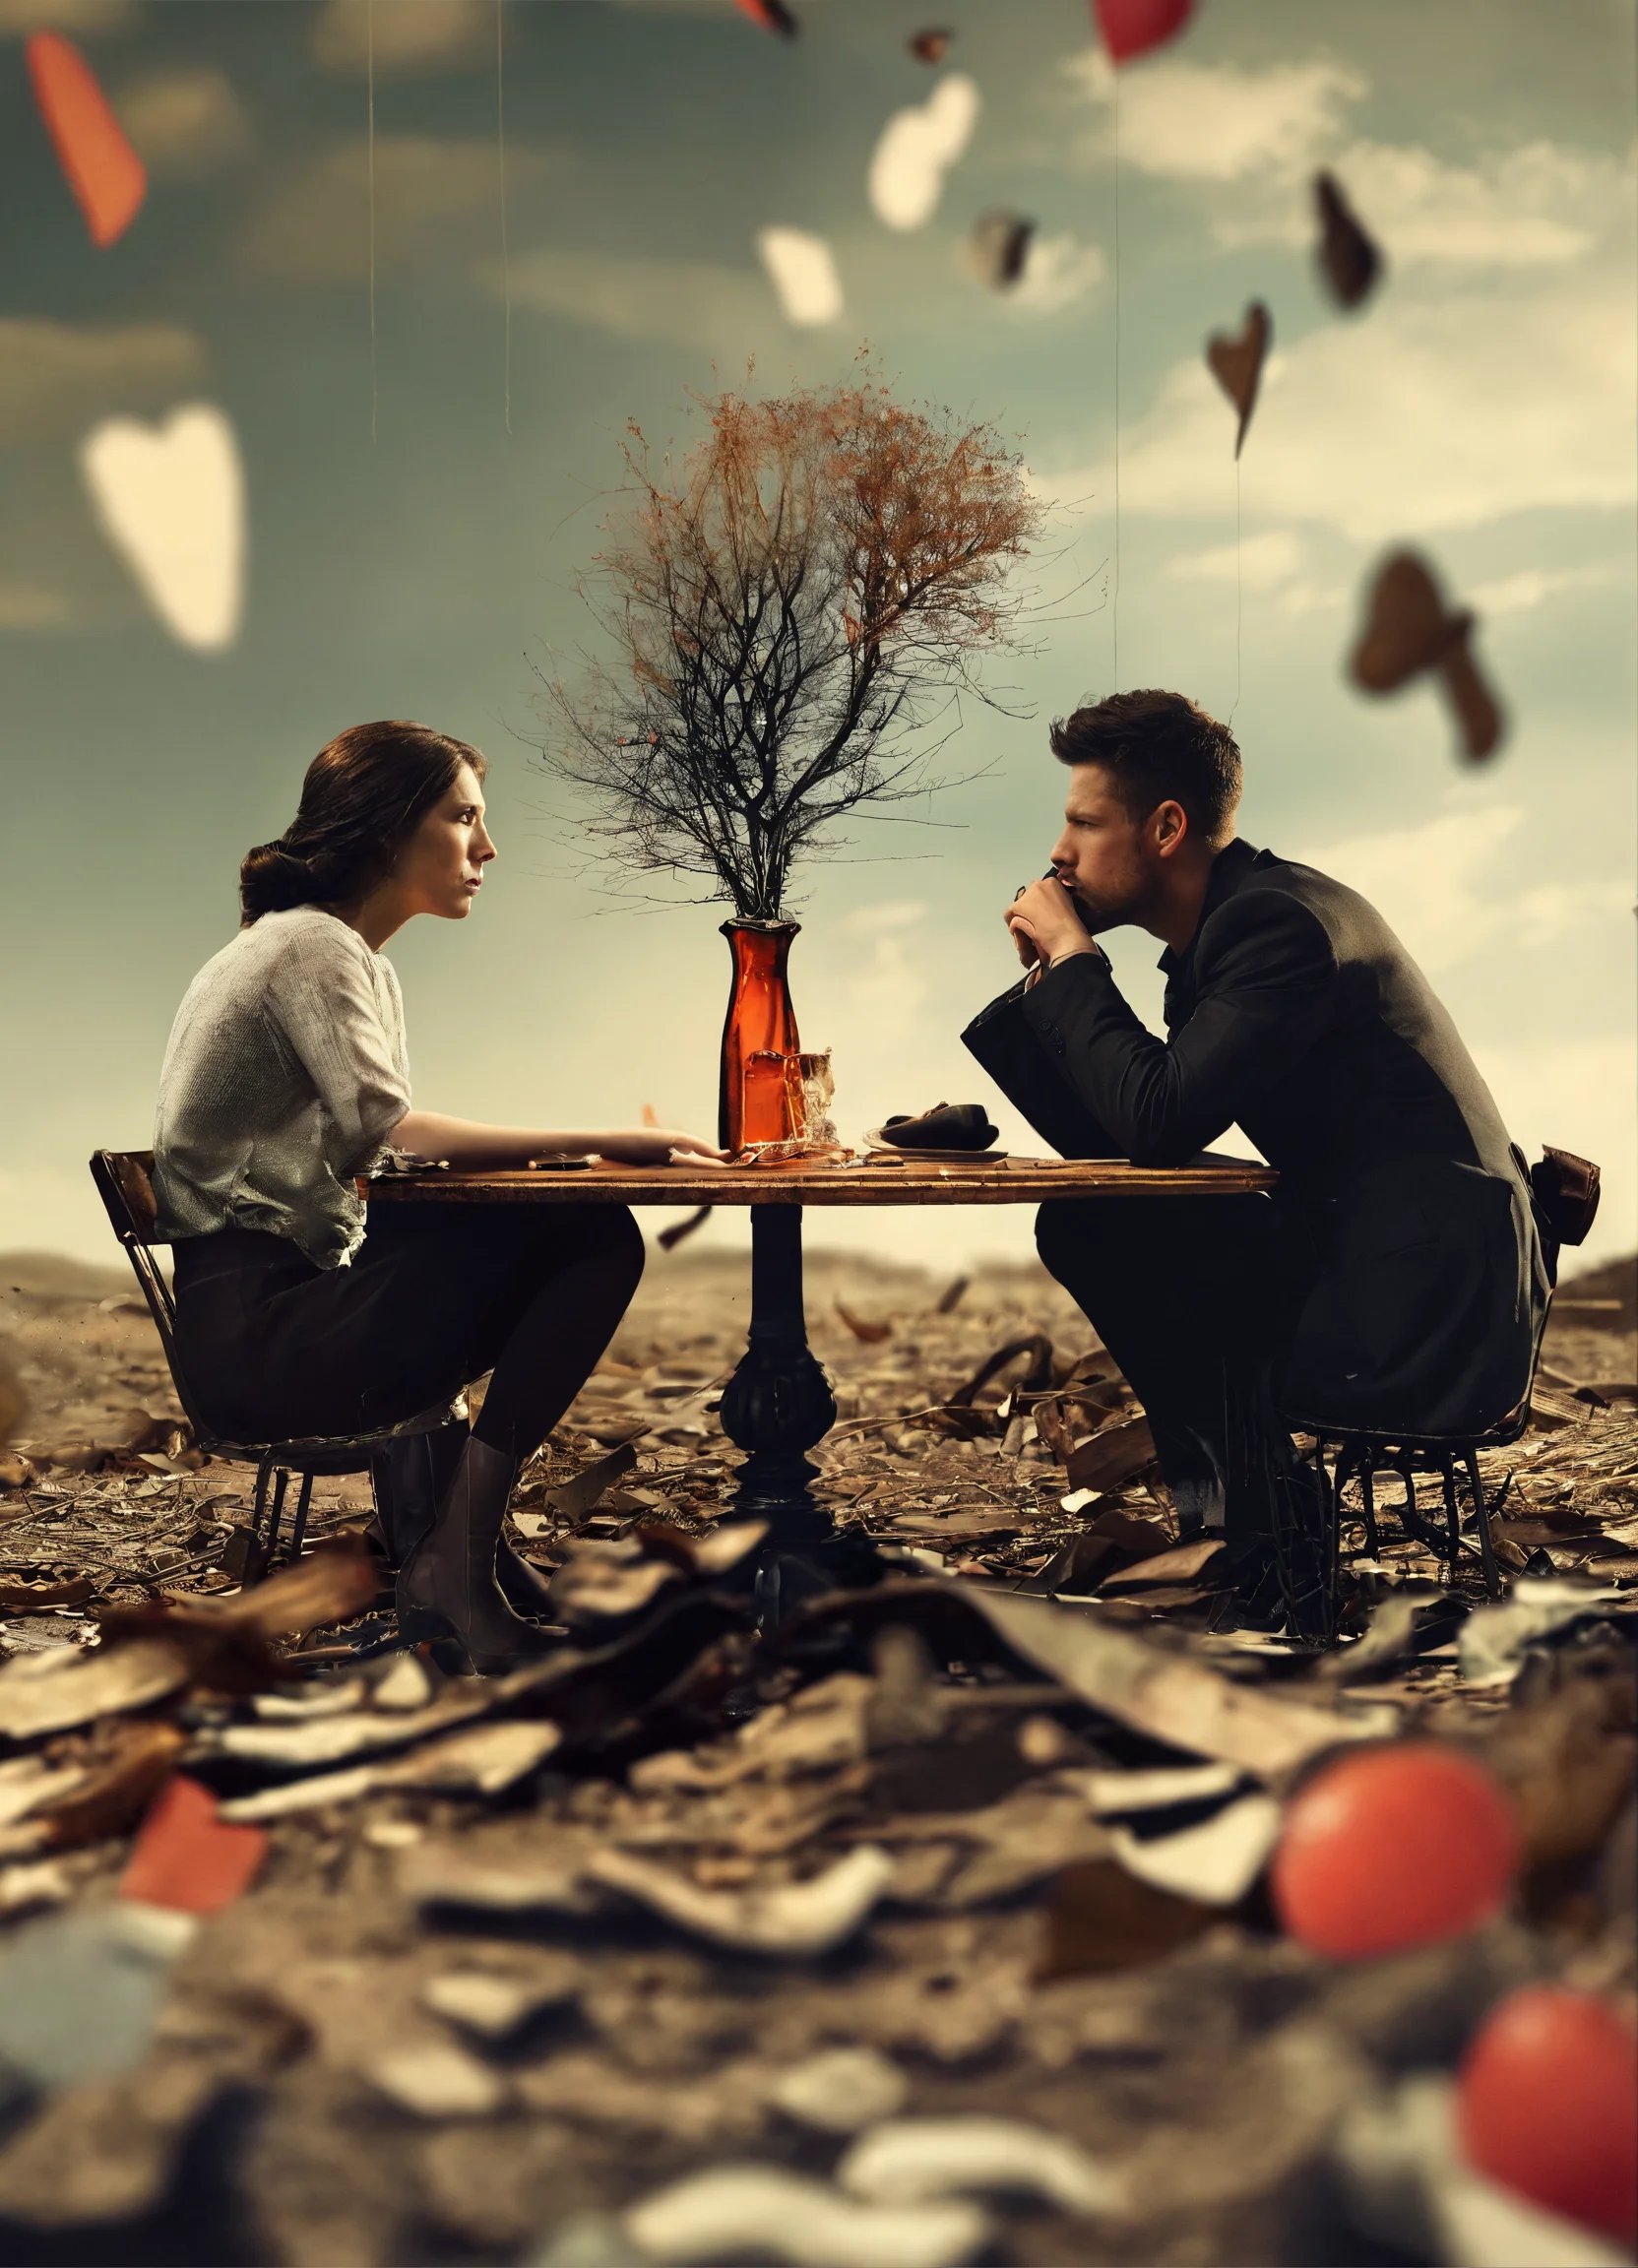 Can I Date During the Divorce? 3 Important Considerations